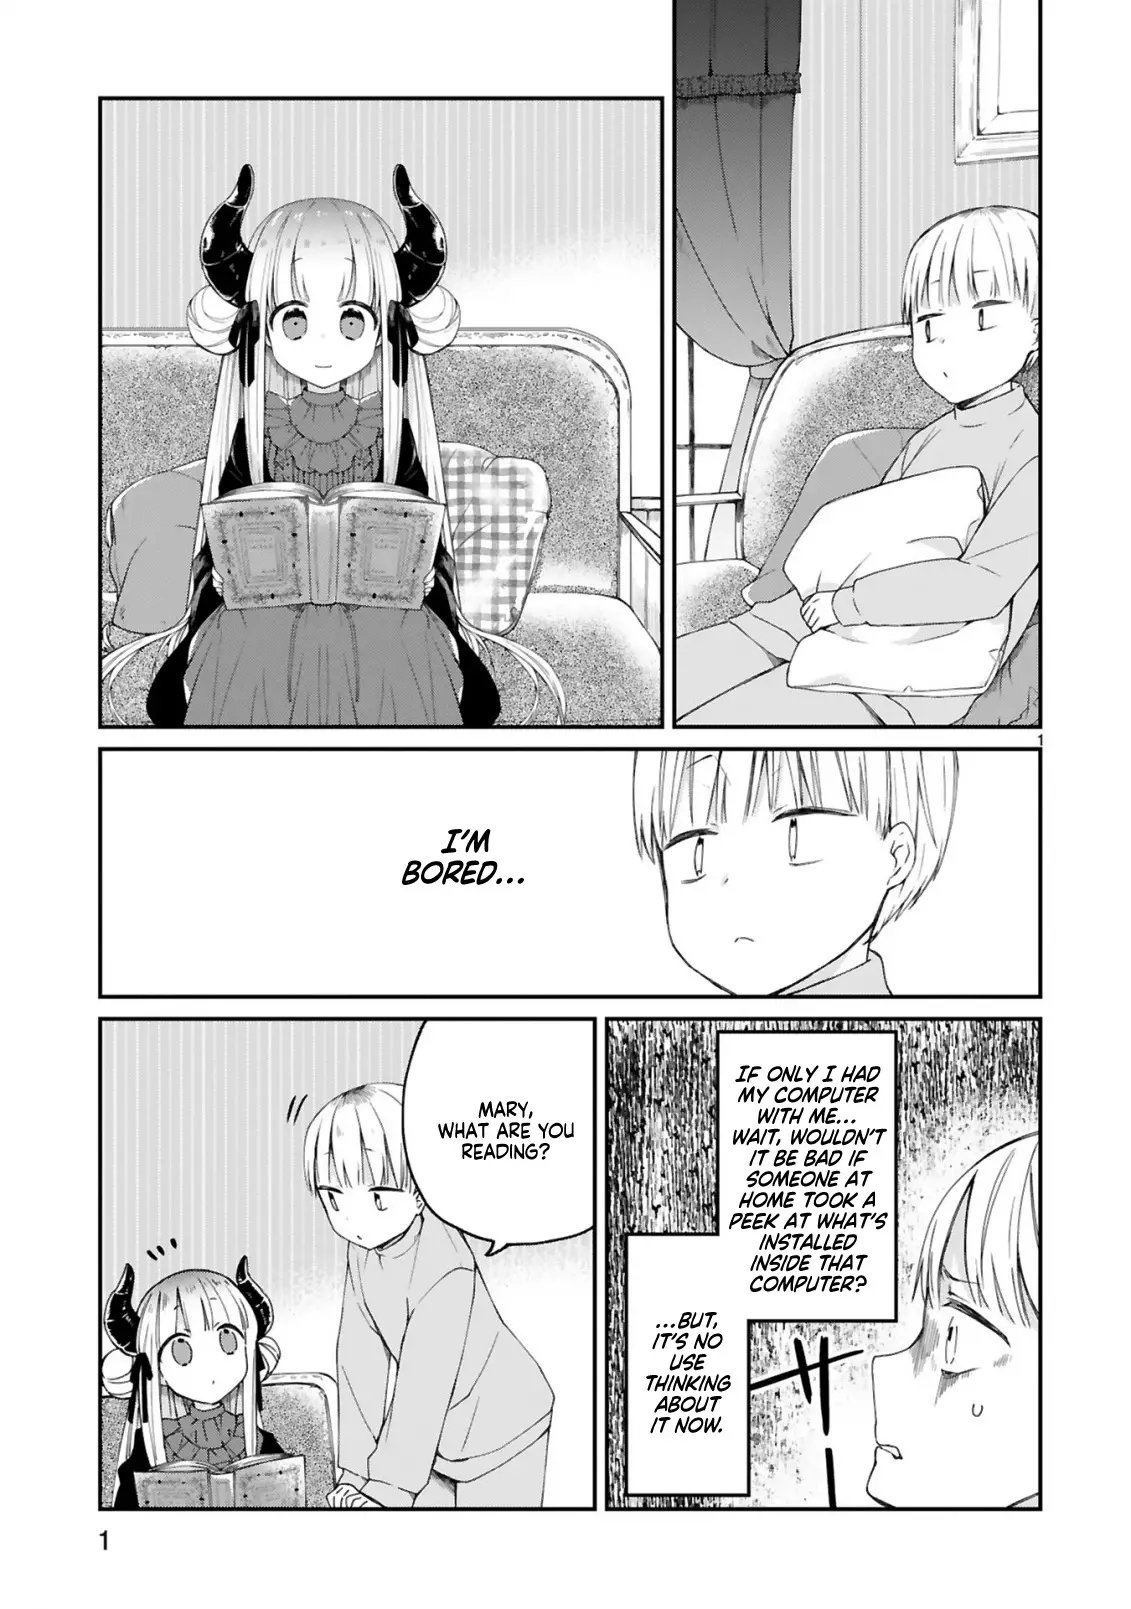 I Was Summoned By The Demon Lord, But I Can't Understand Her Language - 7 page 1